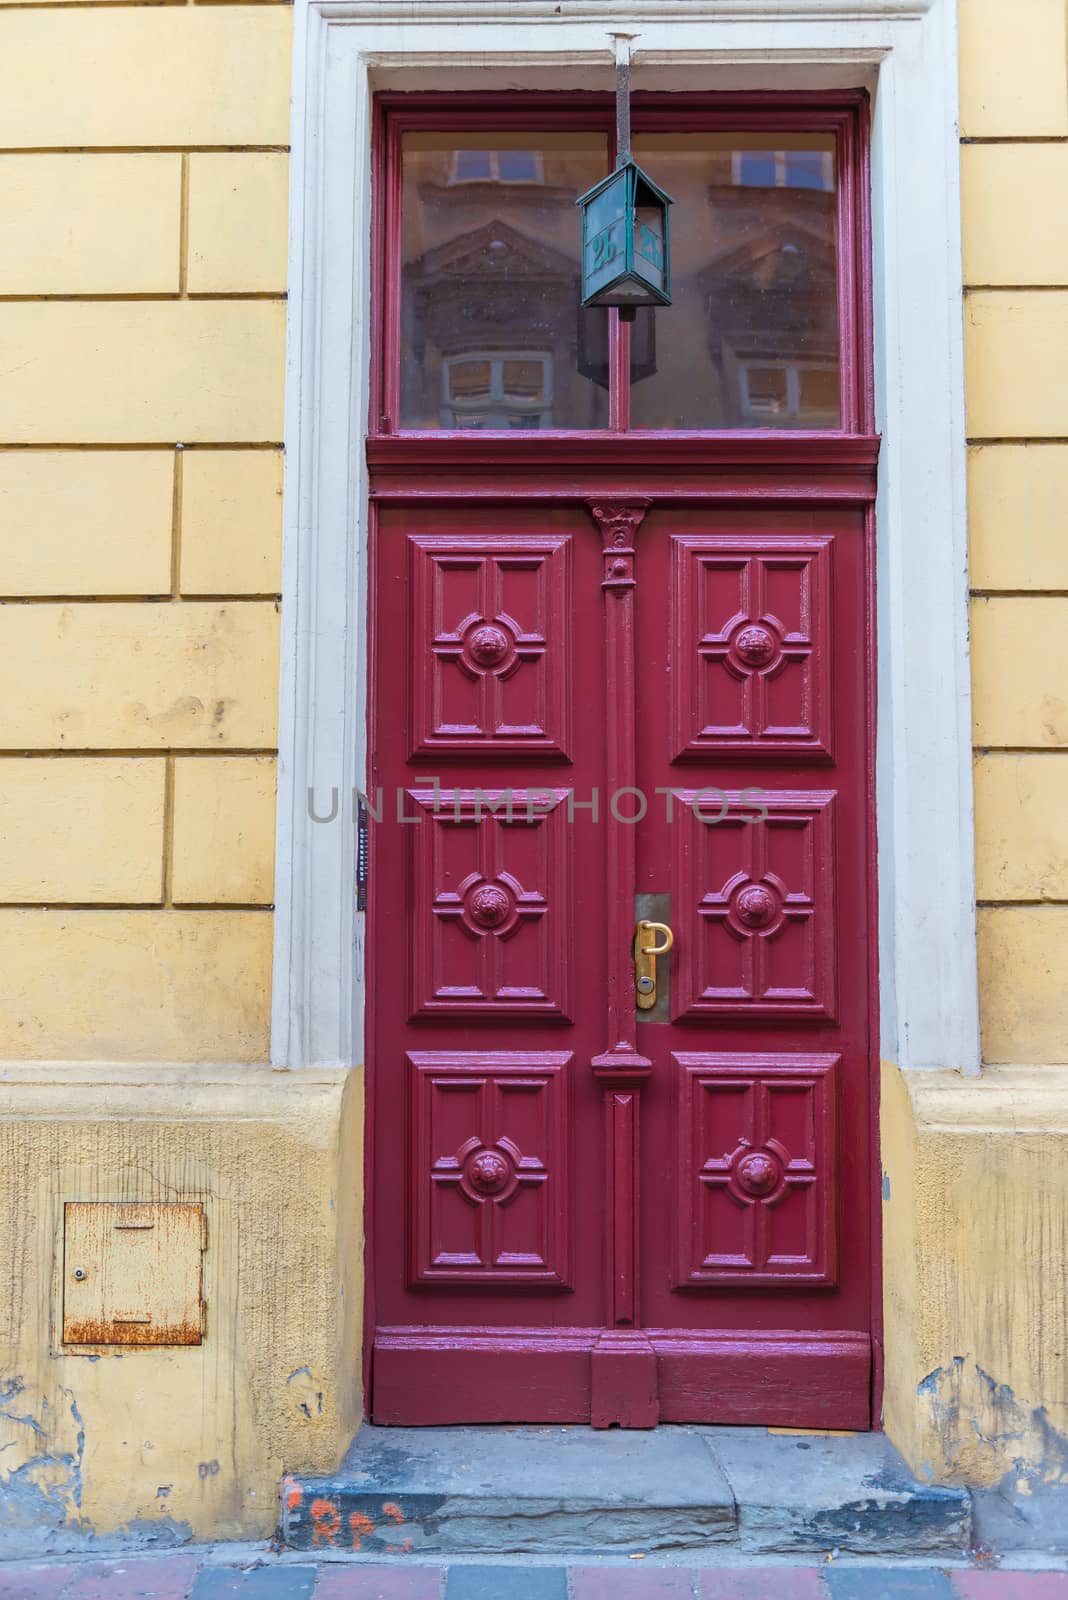 residential building view of the cherry-colored door close-up